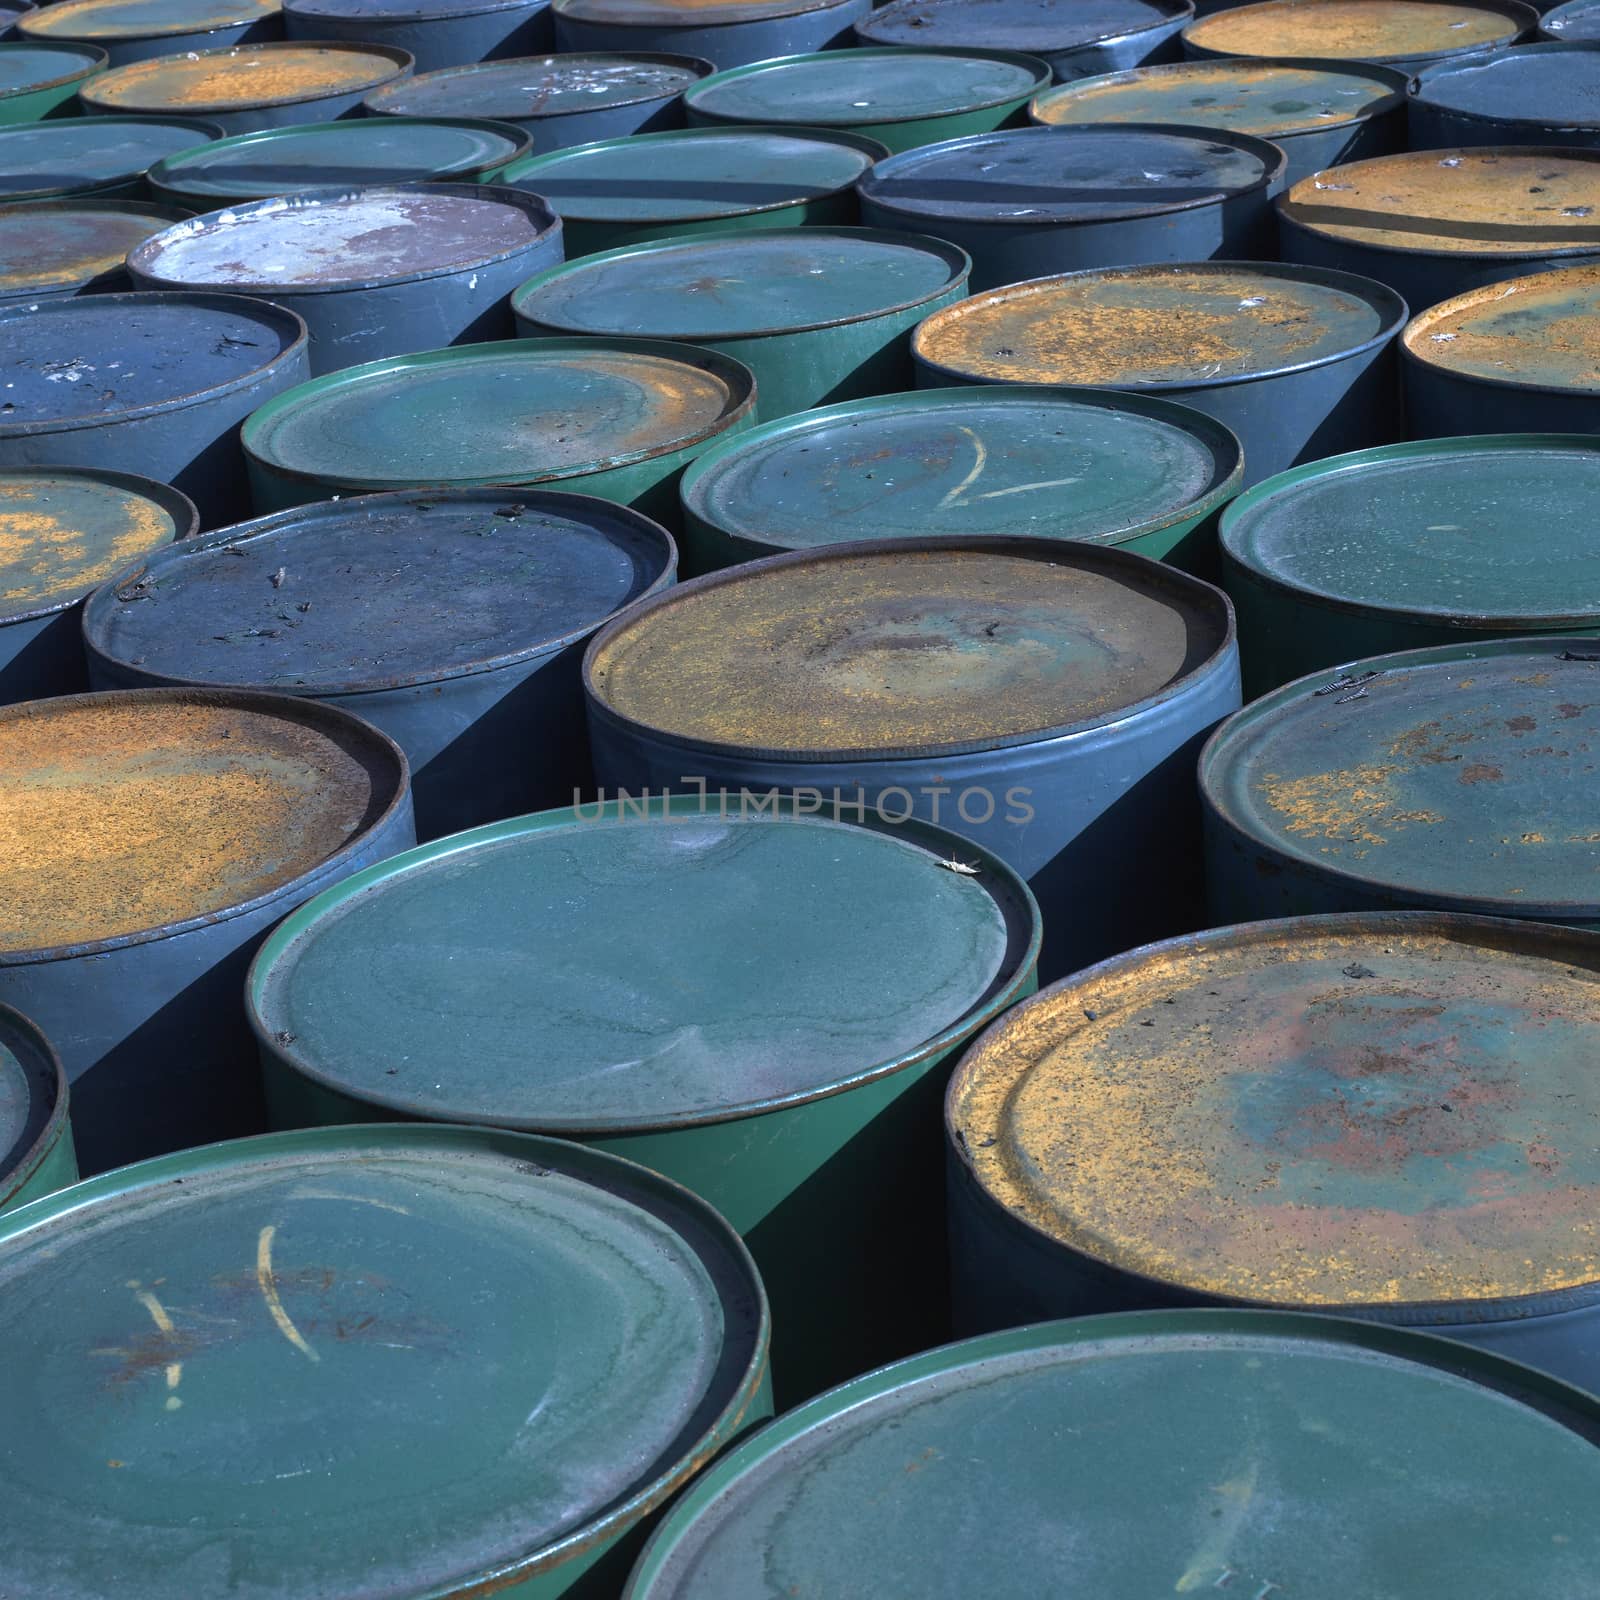 Rows of colorful and rusty barrels